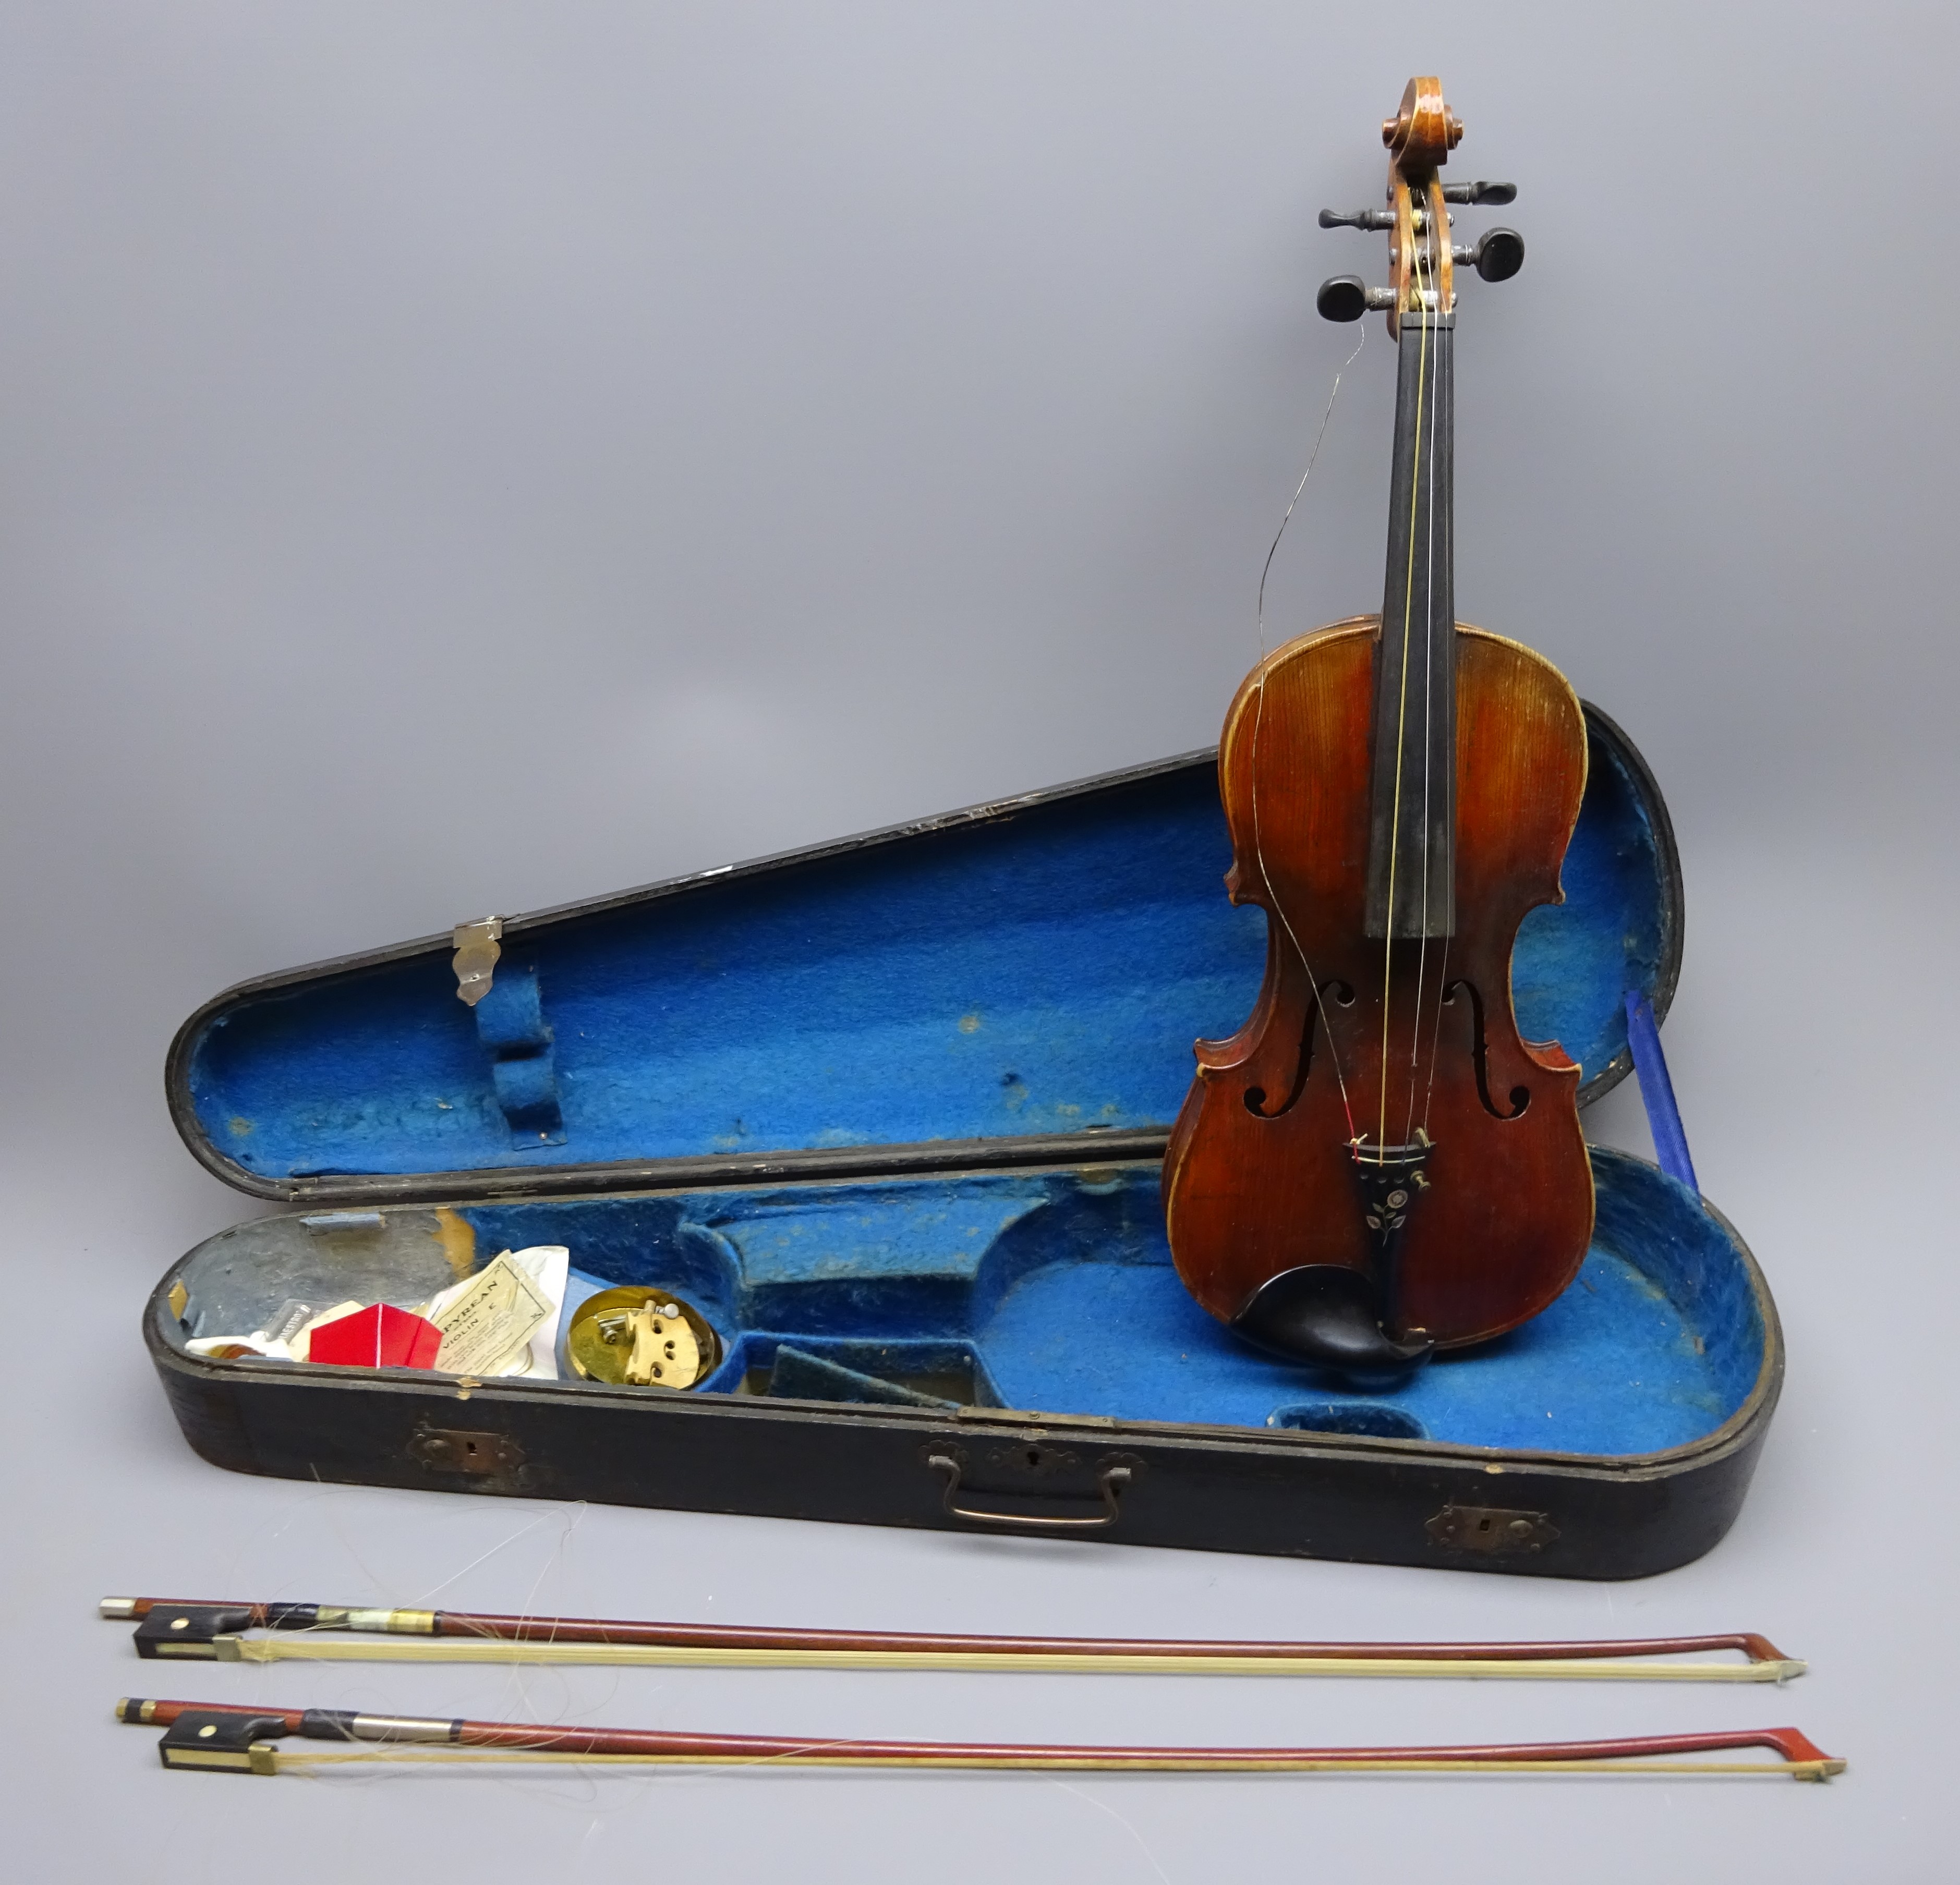 Early 20th century German violin with 36cm two-piece maple back and ribs and spruce top L58.